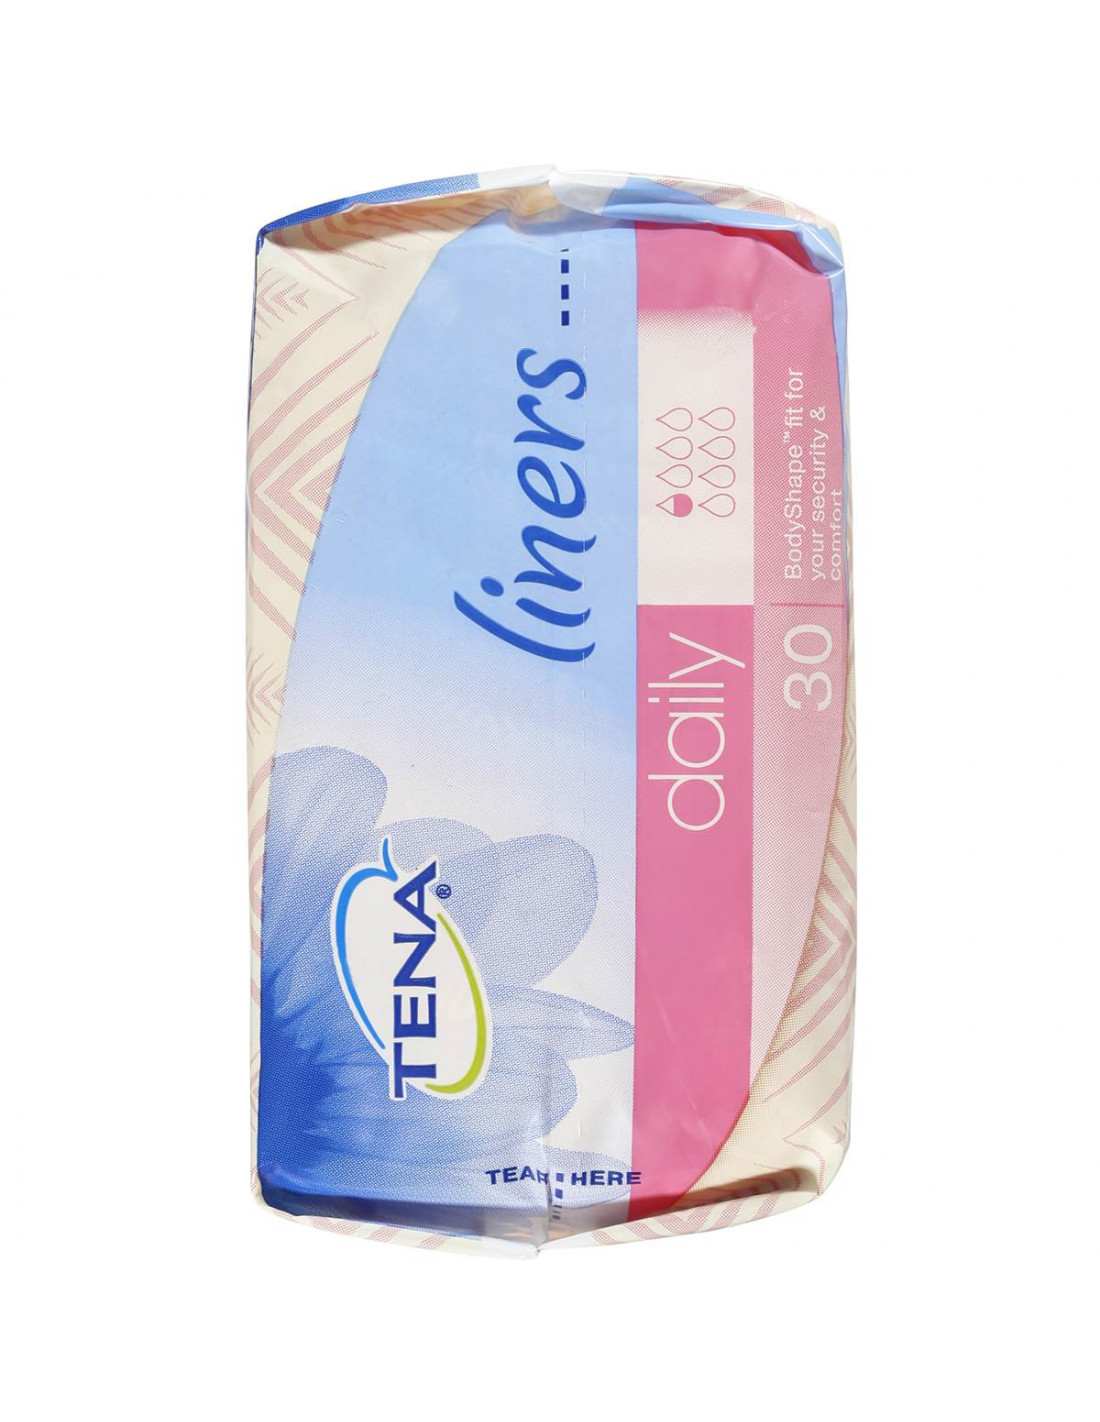 Tena Active Panty Liners Odour Control 30 pack | Ally's Basket - Di...